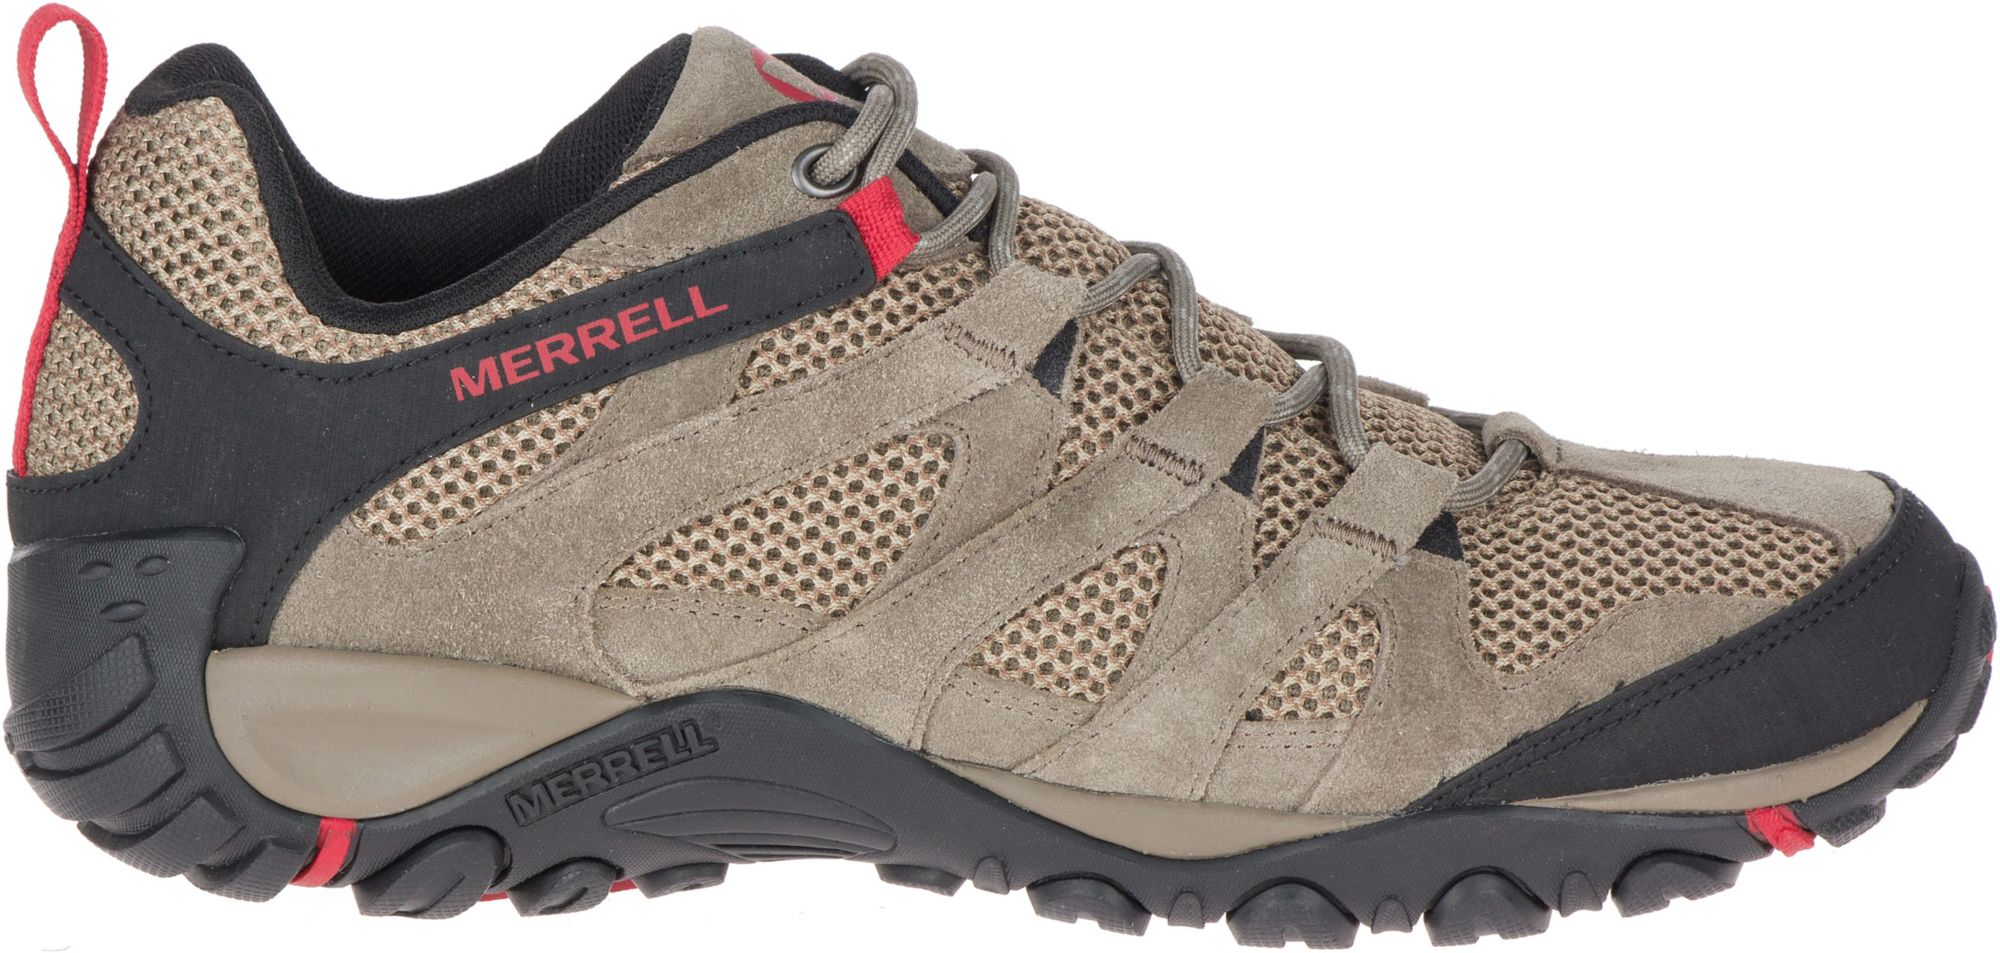 Merrell Men's or Women's Alverstone Hiking Shoes (Select Colors) $50 + Free Shipping